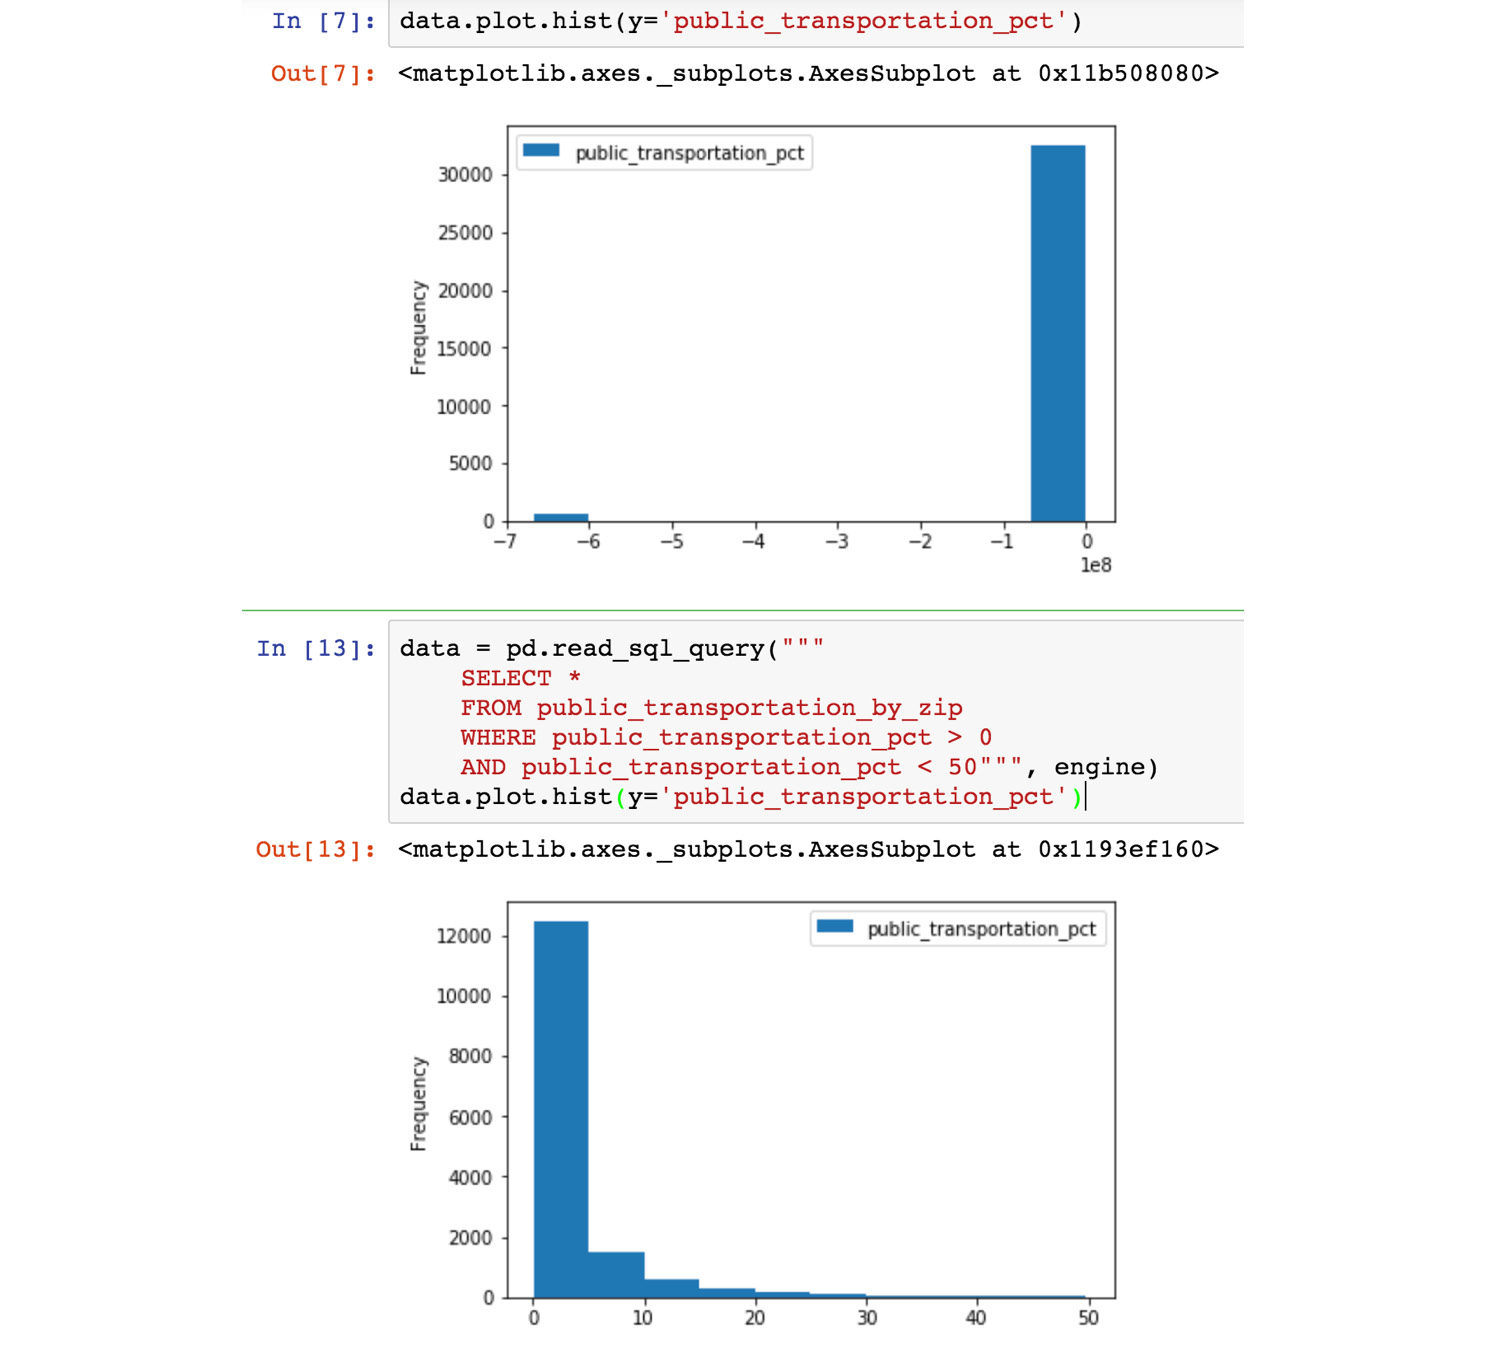 Figure 6.28: Jupyter notebook with analysis of the public transportation data
